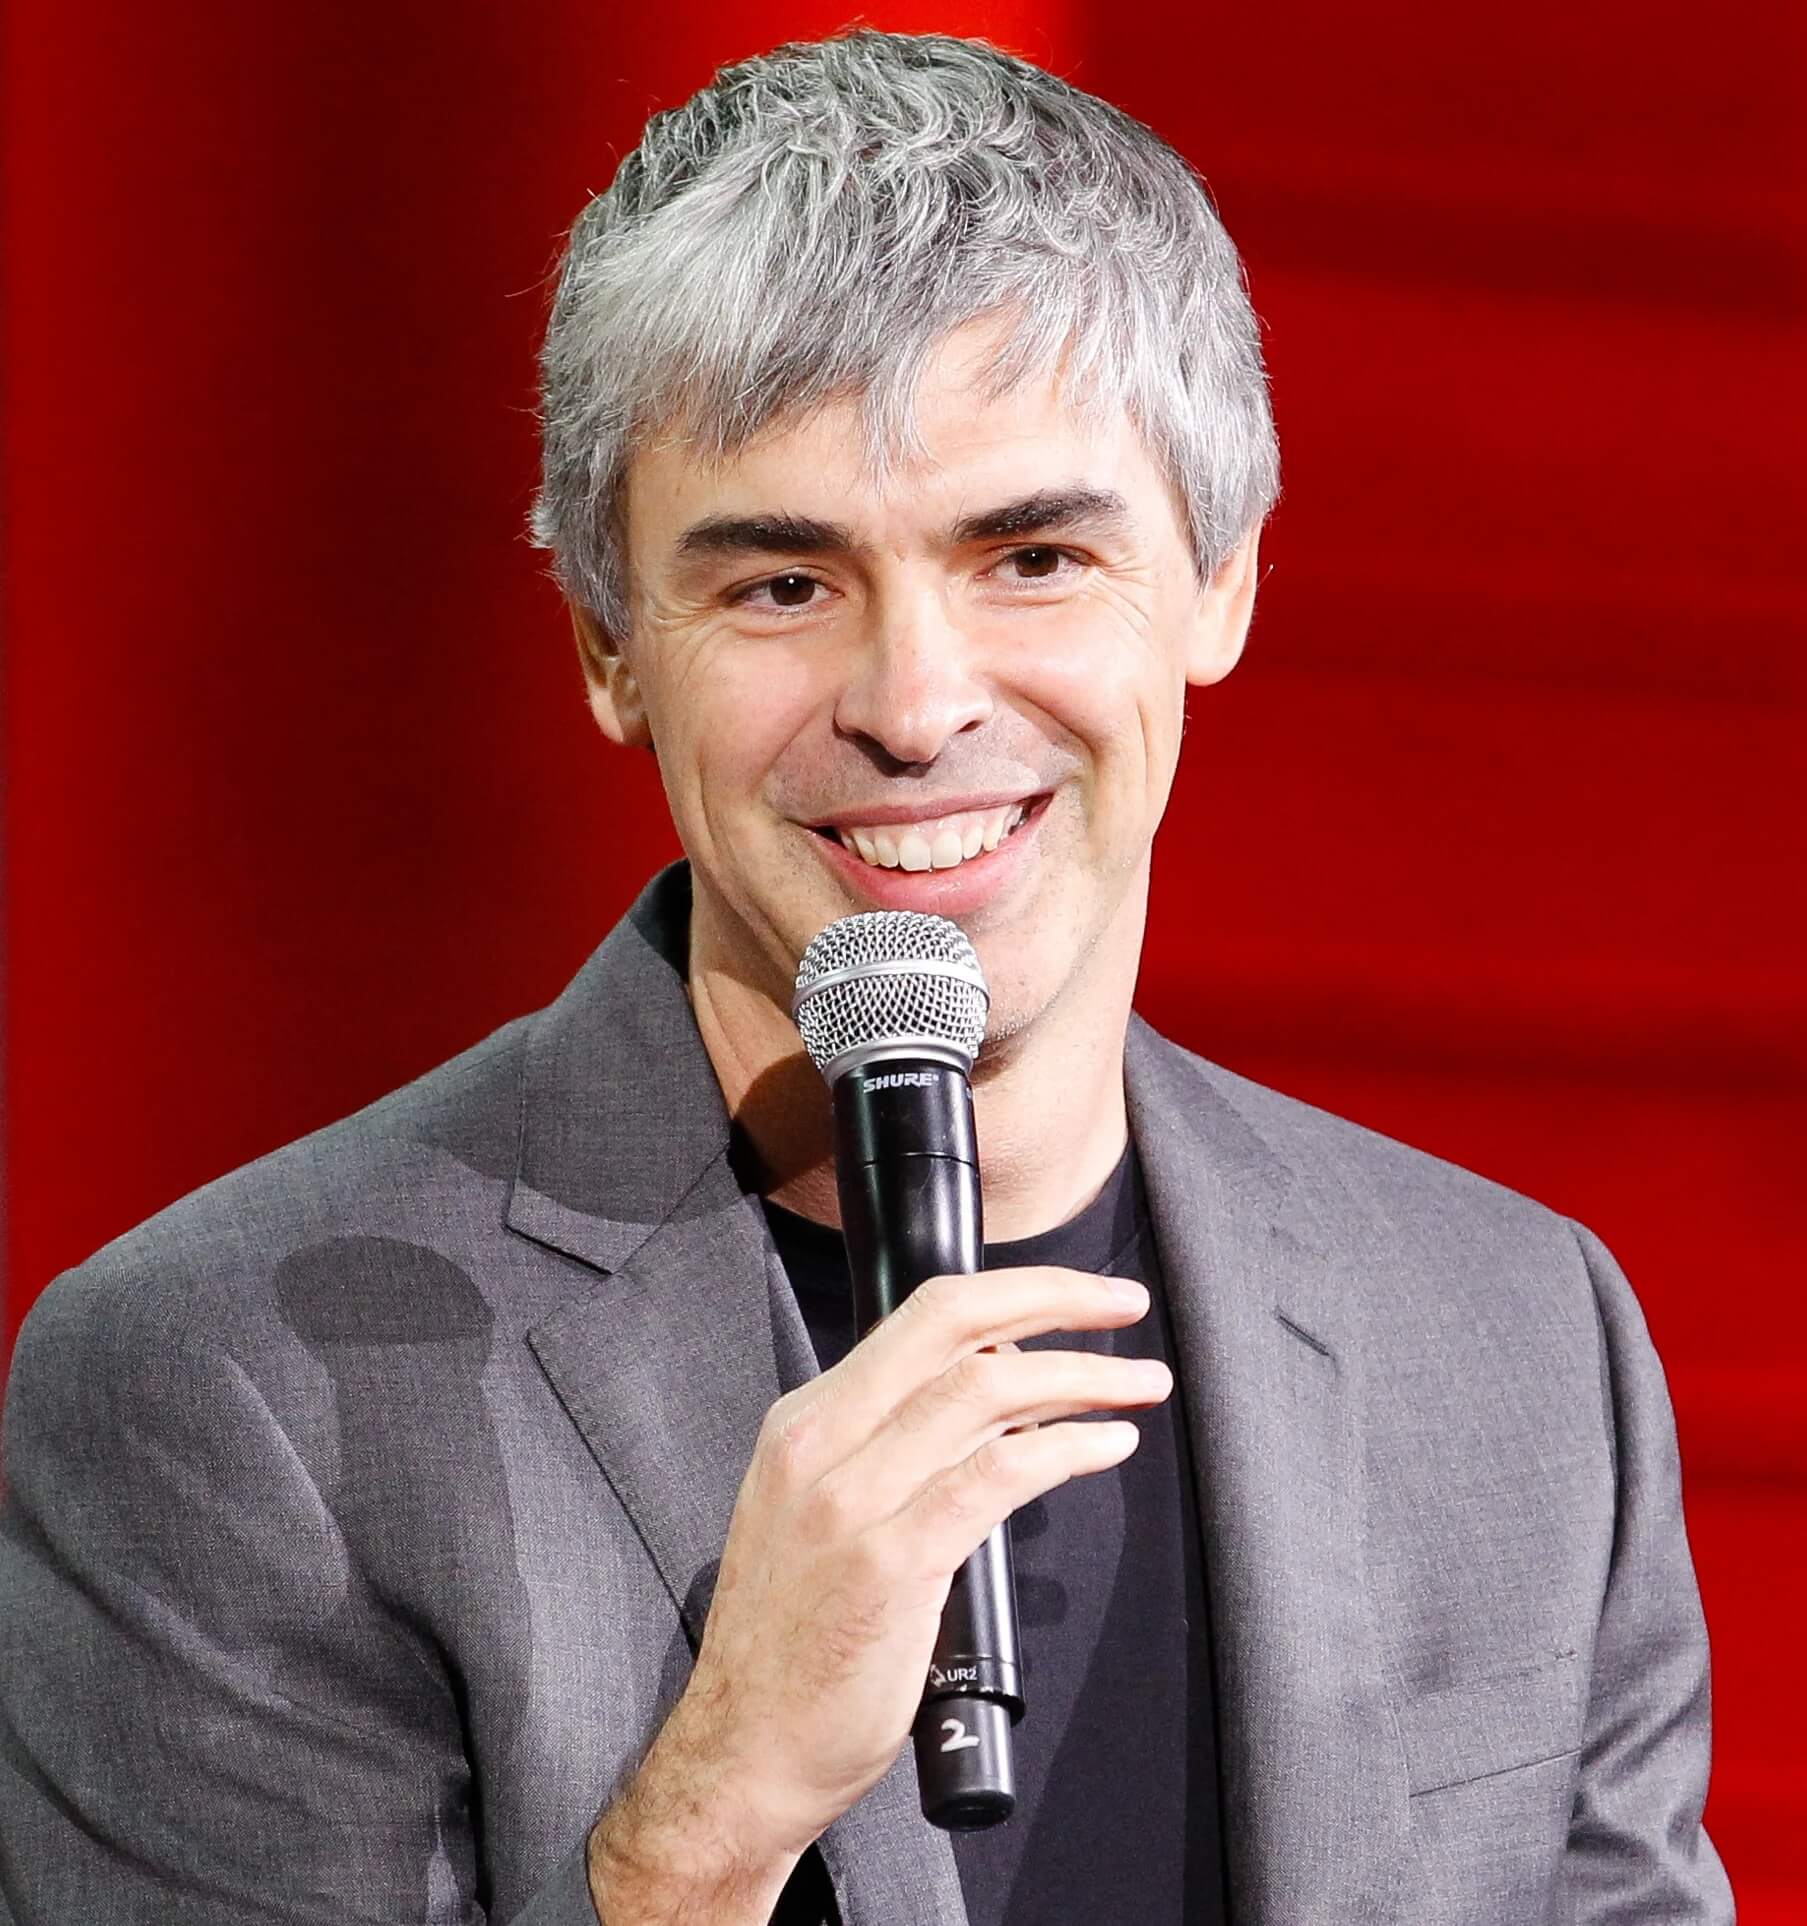 Larry Page